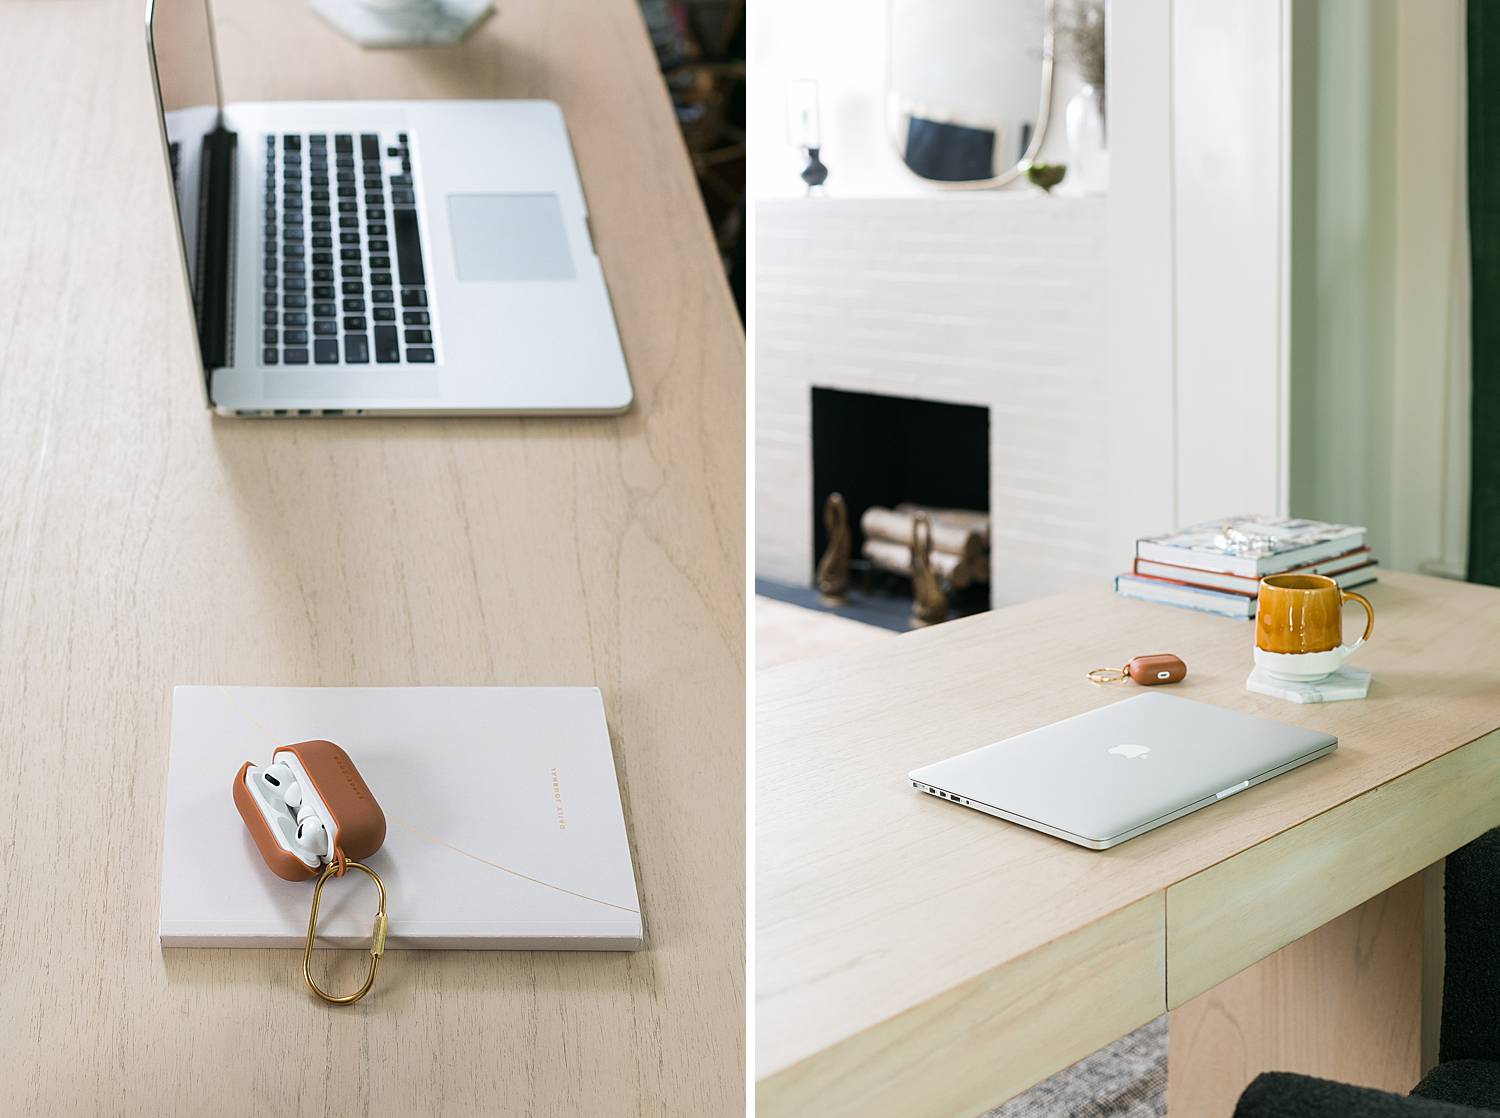 modern office with light wood desk and macbook laptop and airpods in terra cotta case